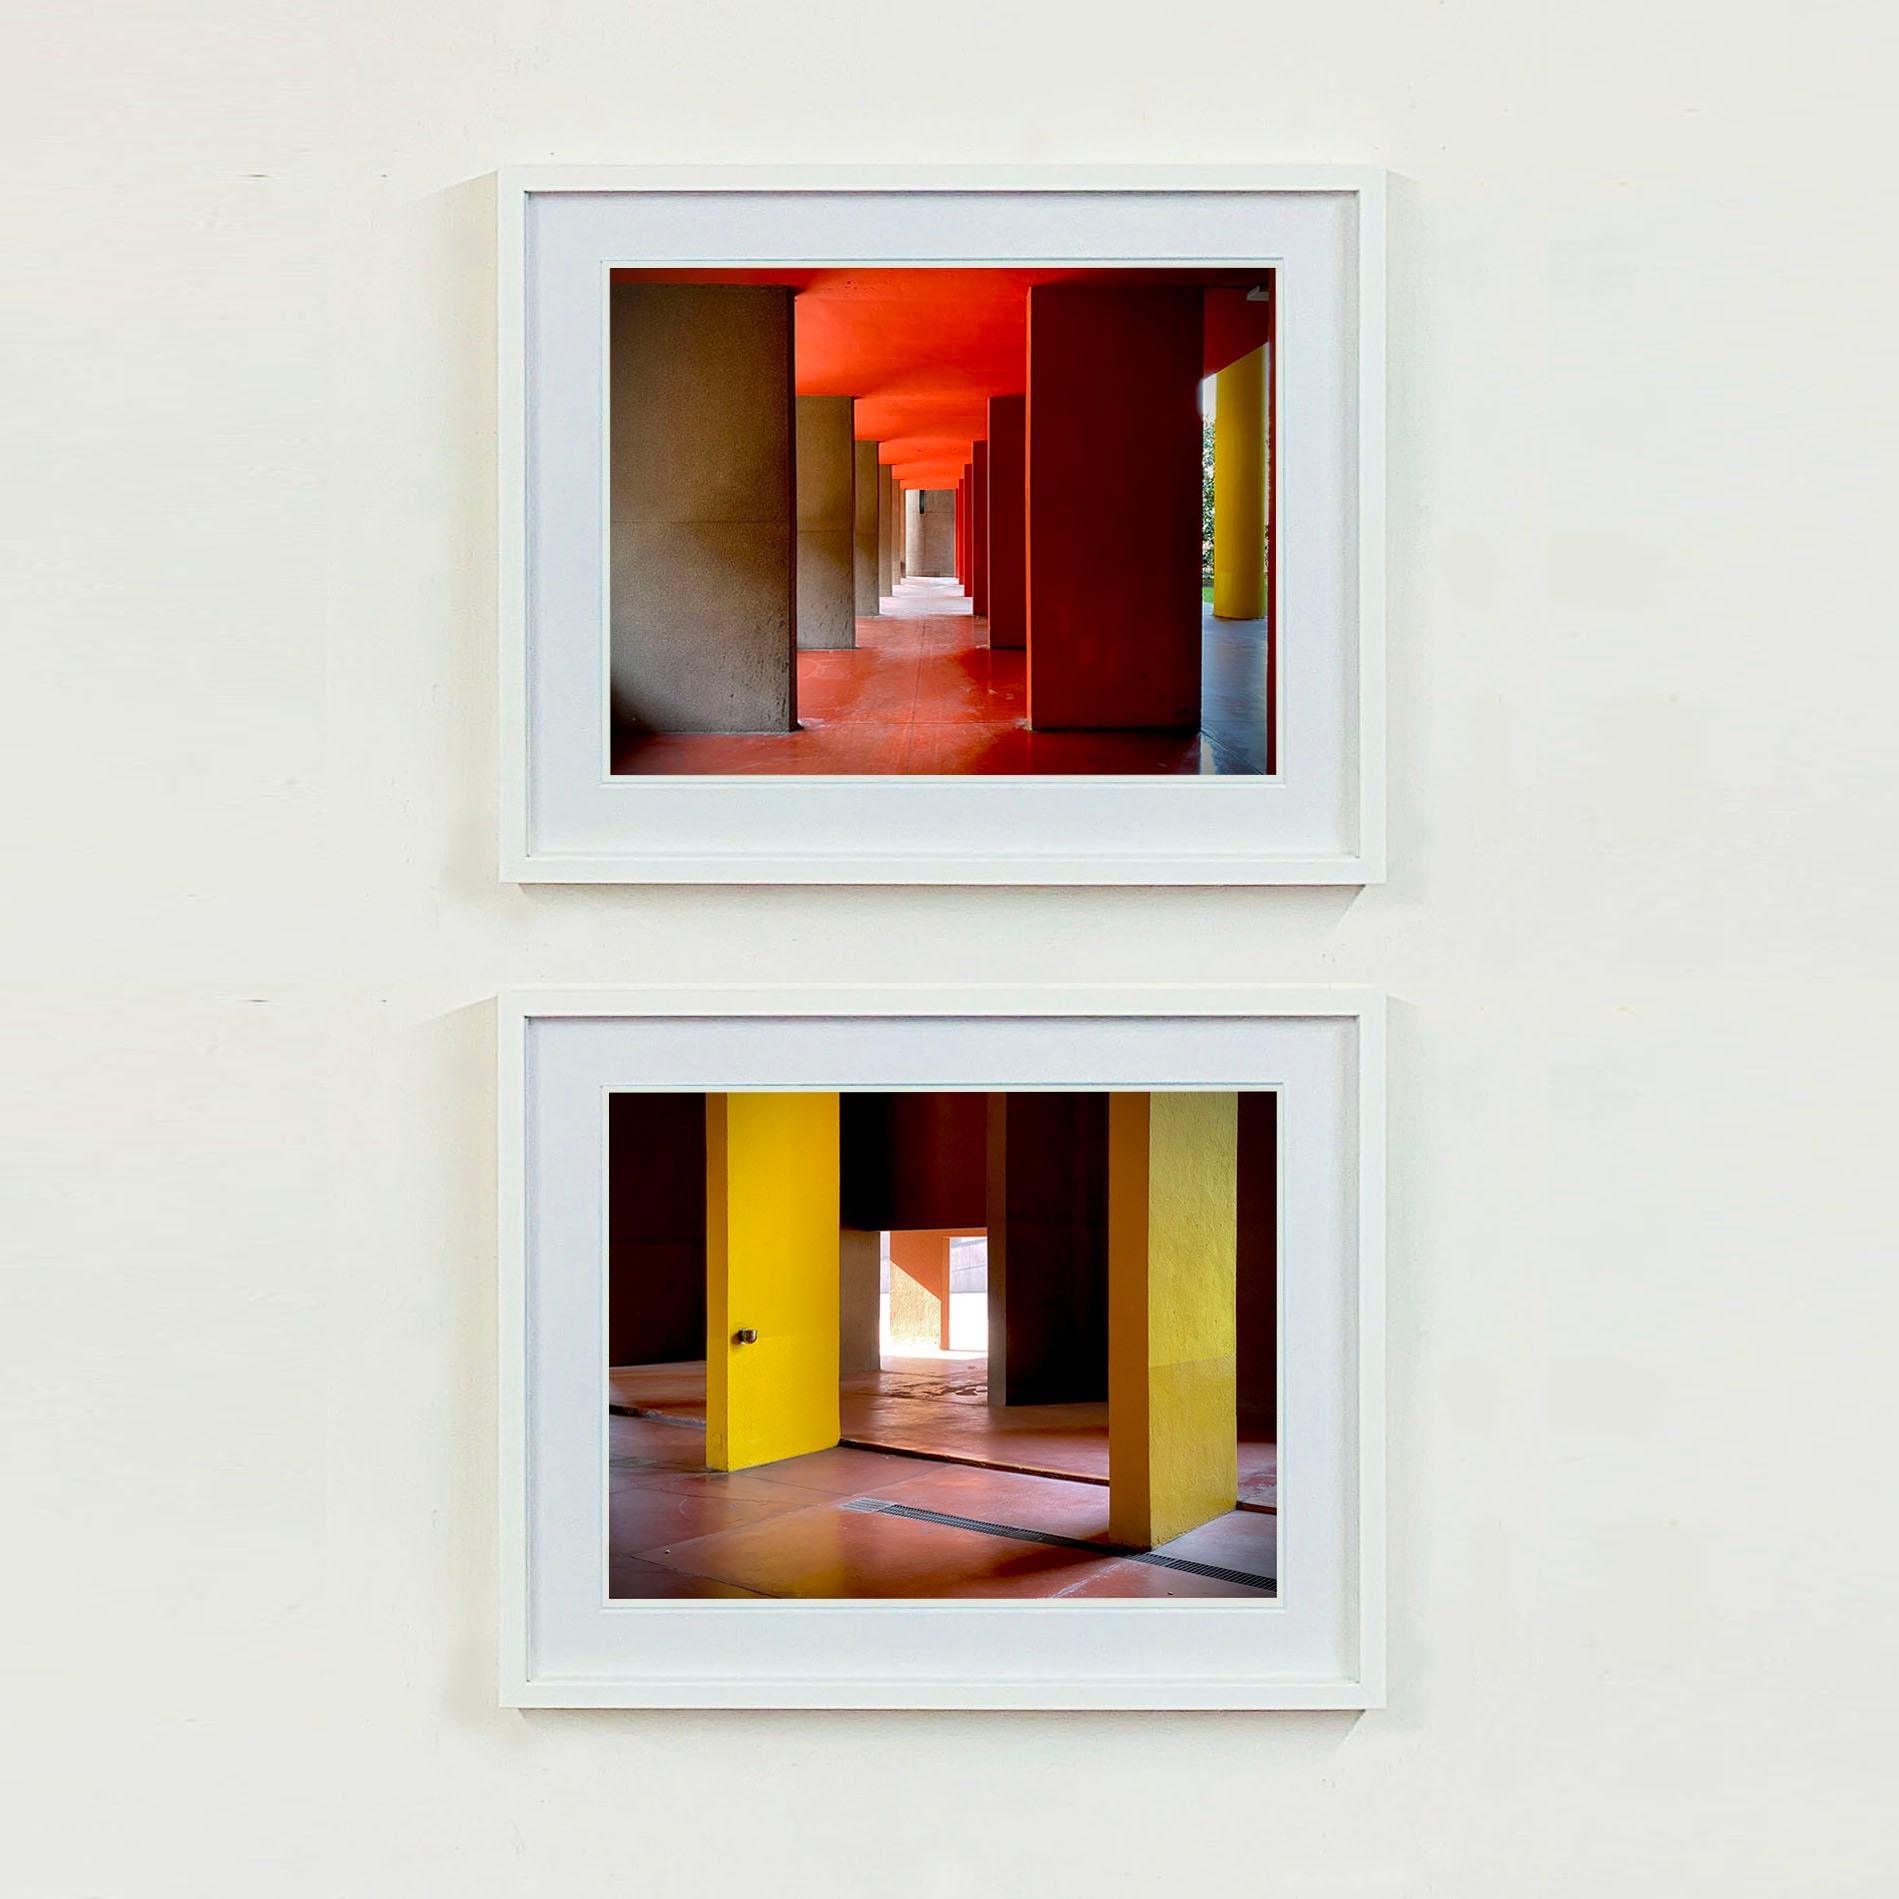 Monte Amiata II, Milan - Color Blocking Architecture Photograph - Contemporary Print by Richard Heeps